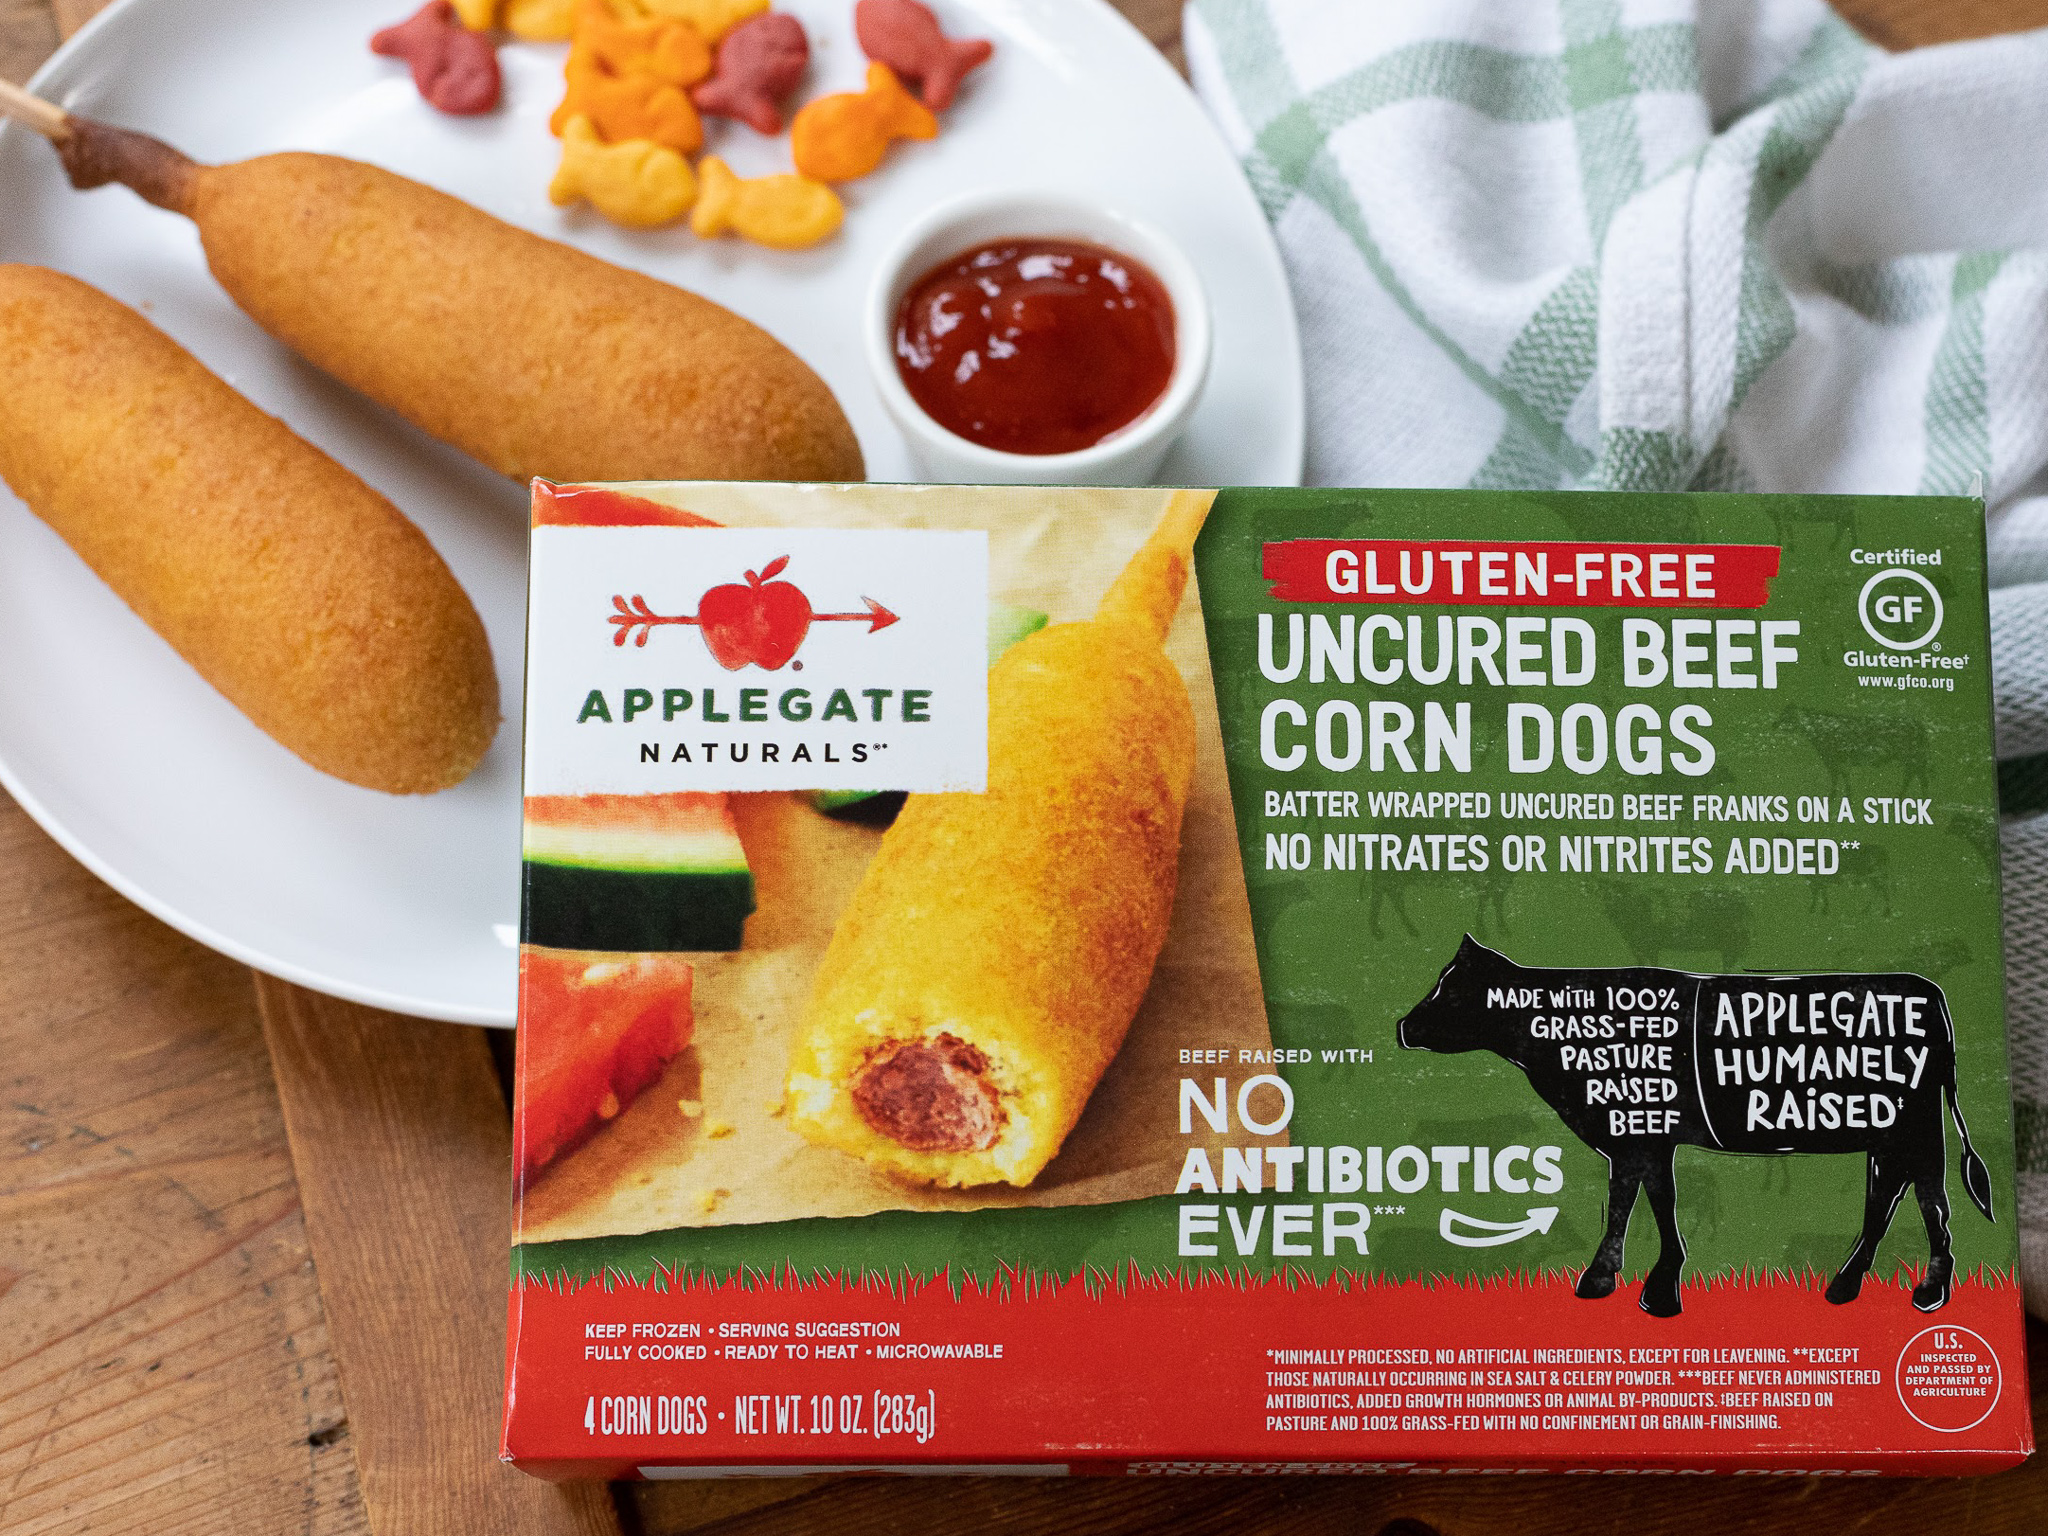 Applegate Uncured Beef Corn Dogs As Low As $4.49 At Publix (Regular Price $8.99)